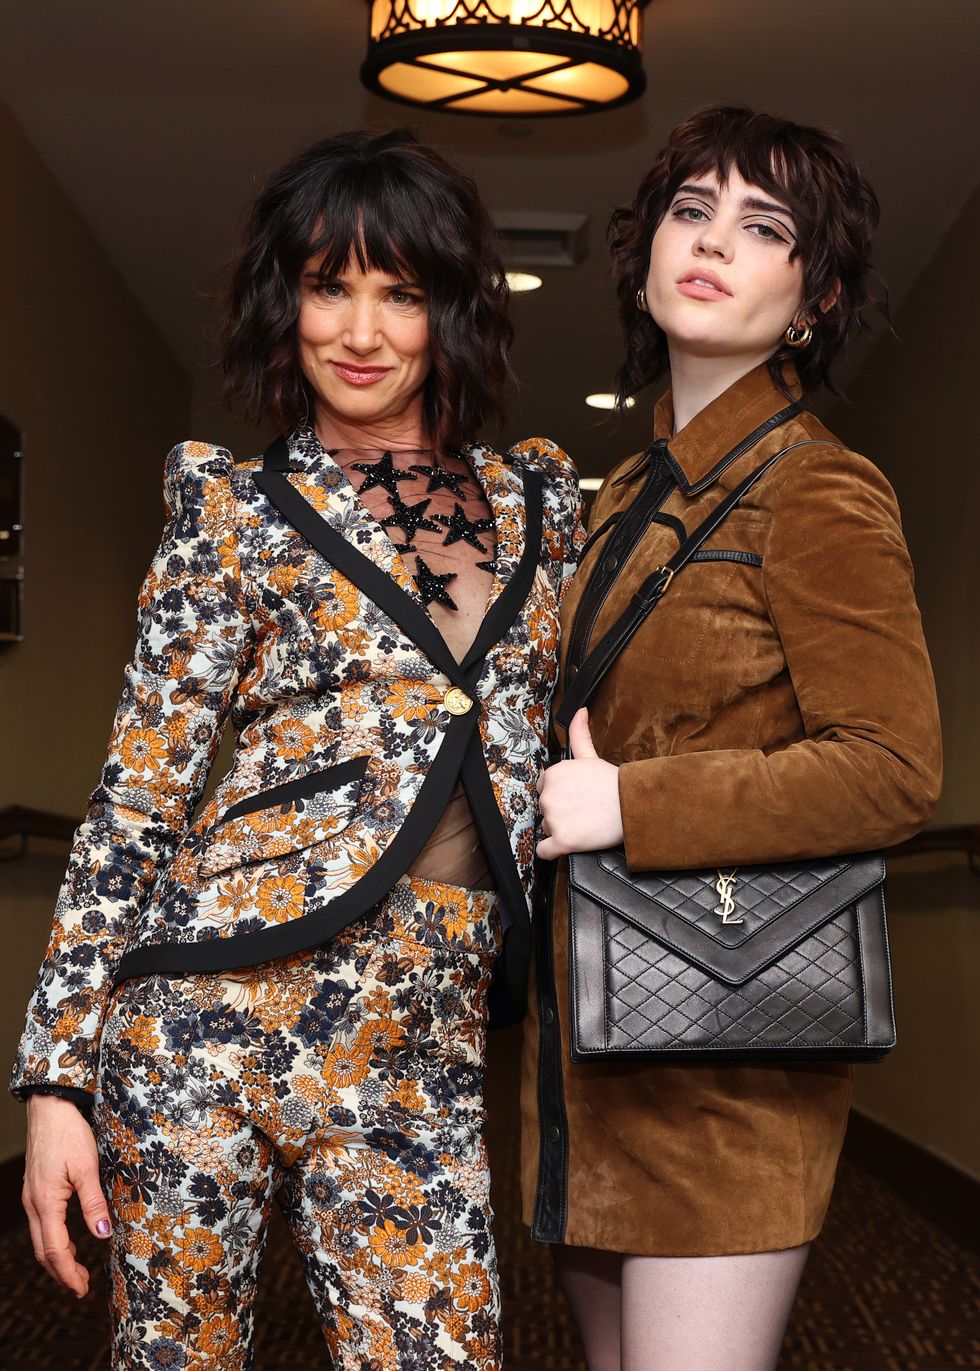 juliette lewis, in a black, white, and gold floral suit, and sophie thatcher, wearing a brown leather dress, pose together in a hallway